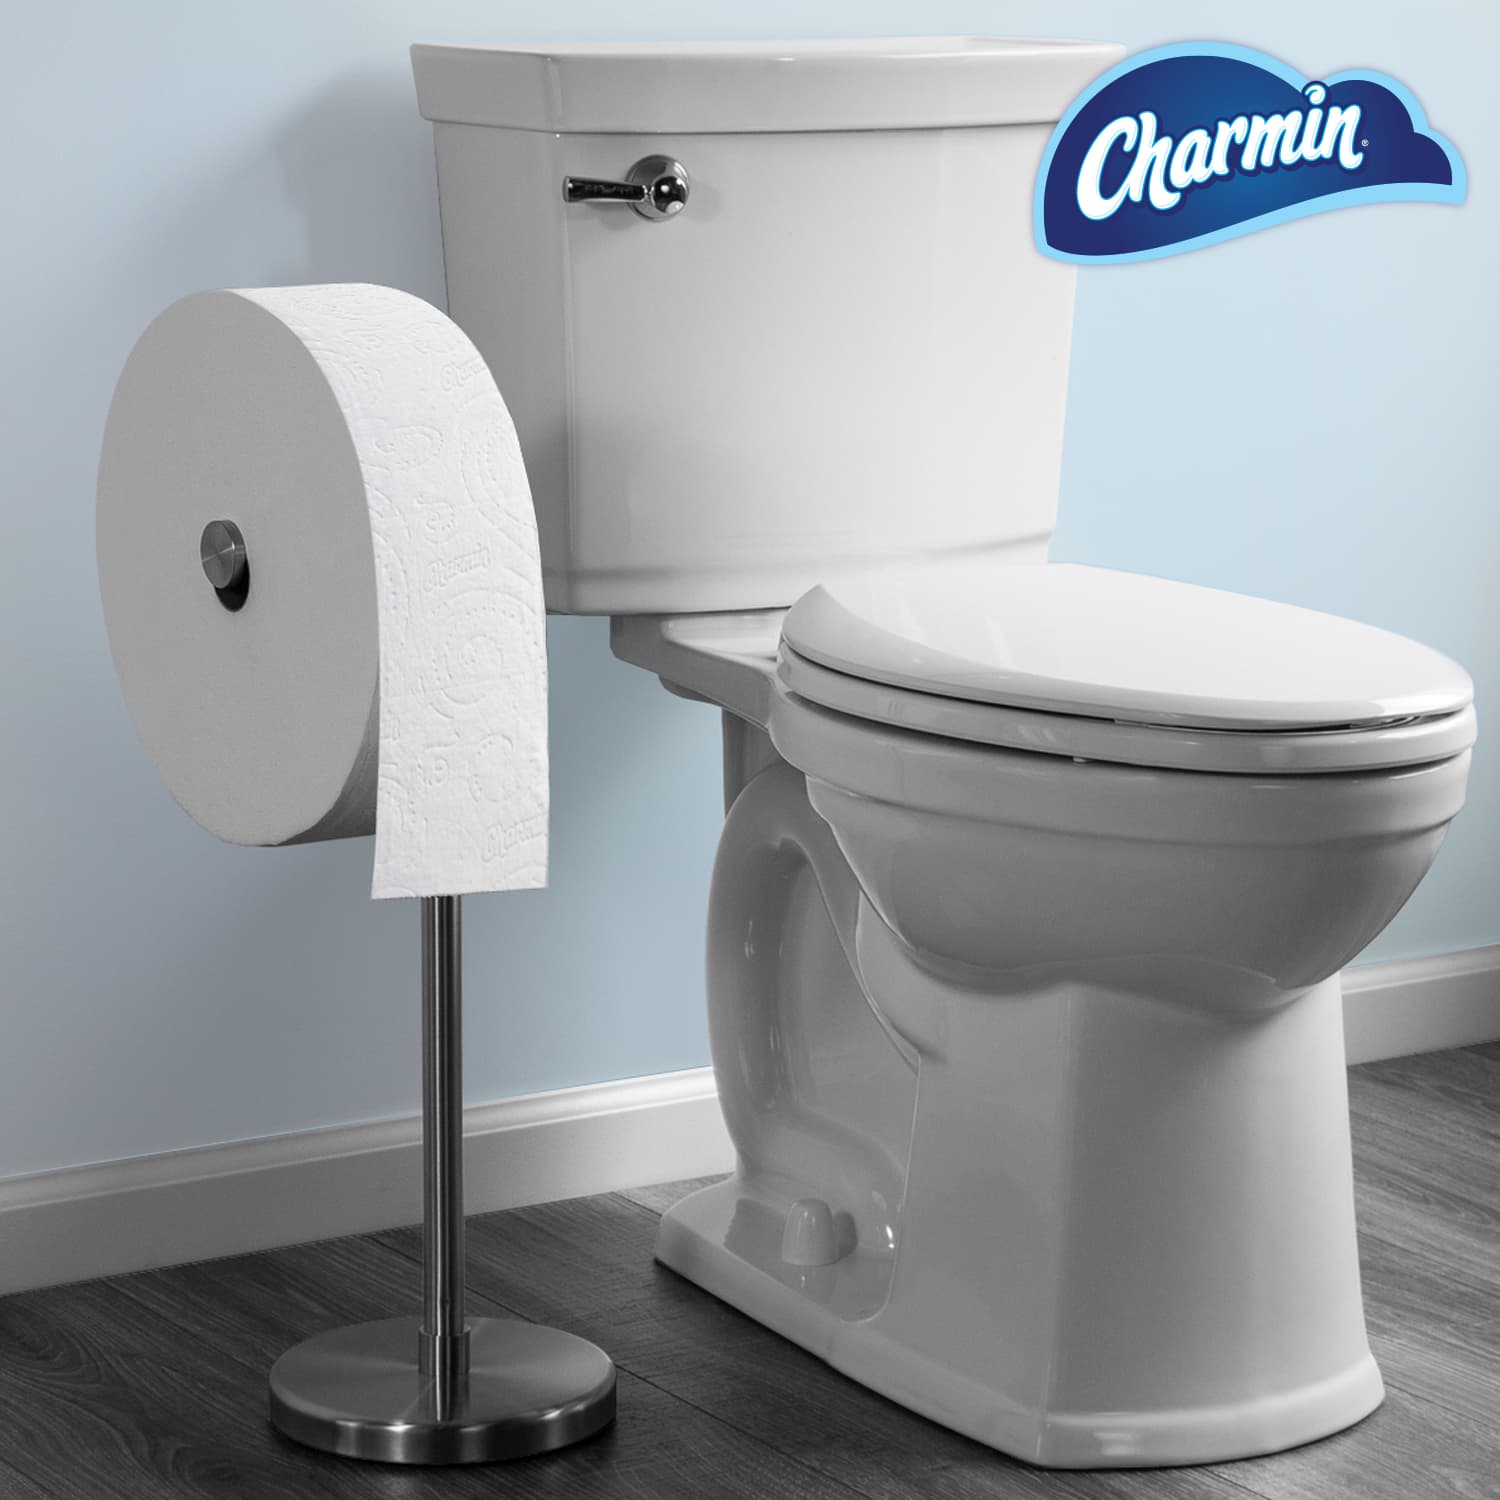 Charmin introduces massive 'Forever Roll' targeted at ...